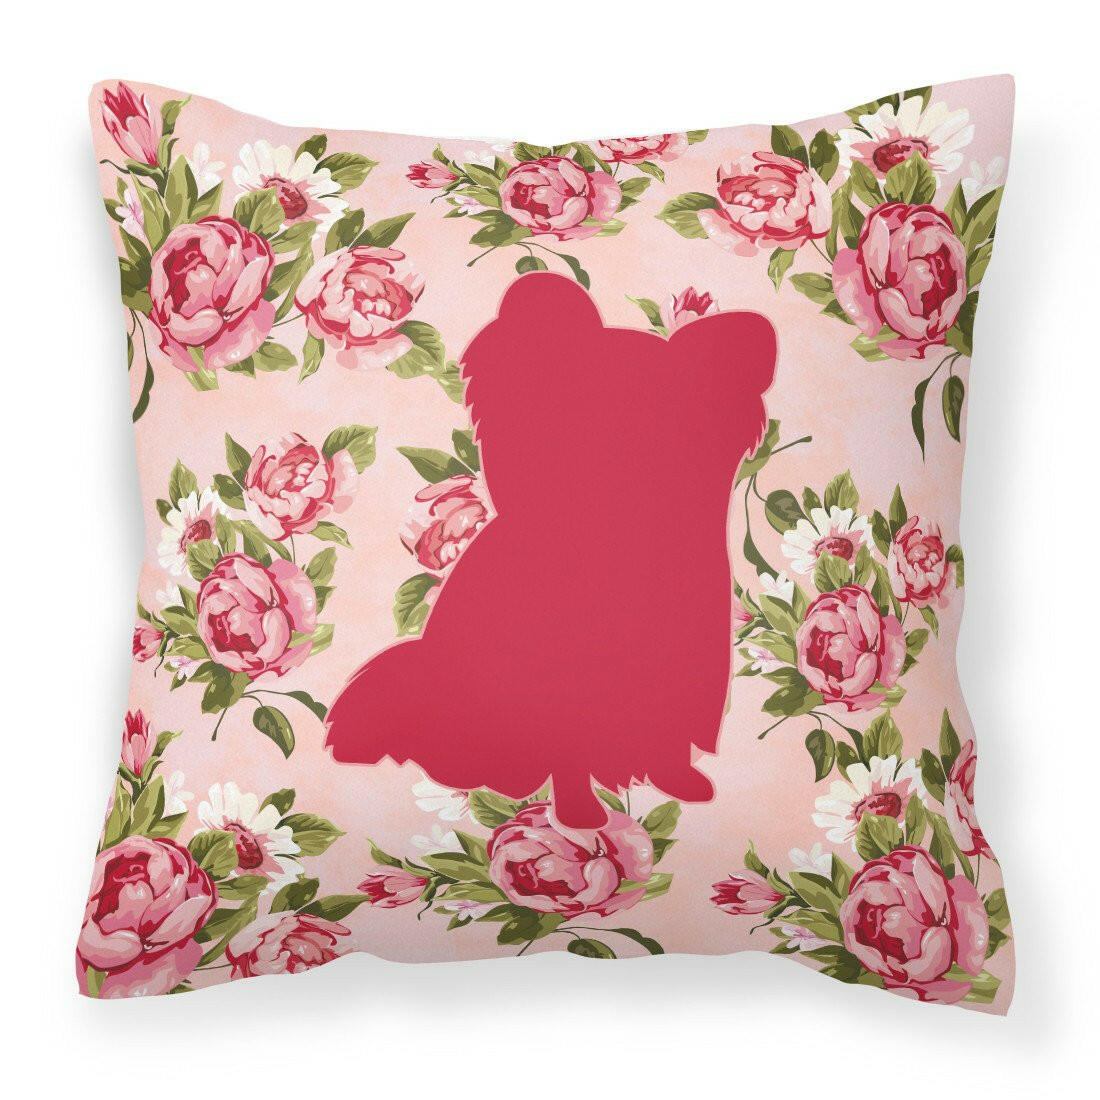 Chihuahua Shabby Chic Pink Roses  Fabric Decorative Pillow BB1115-RS-PK-PW1414 - the-store.com